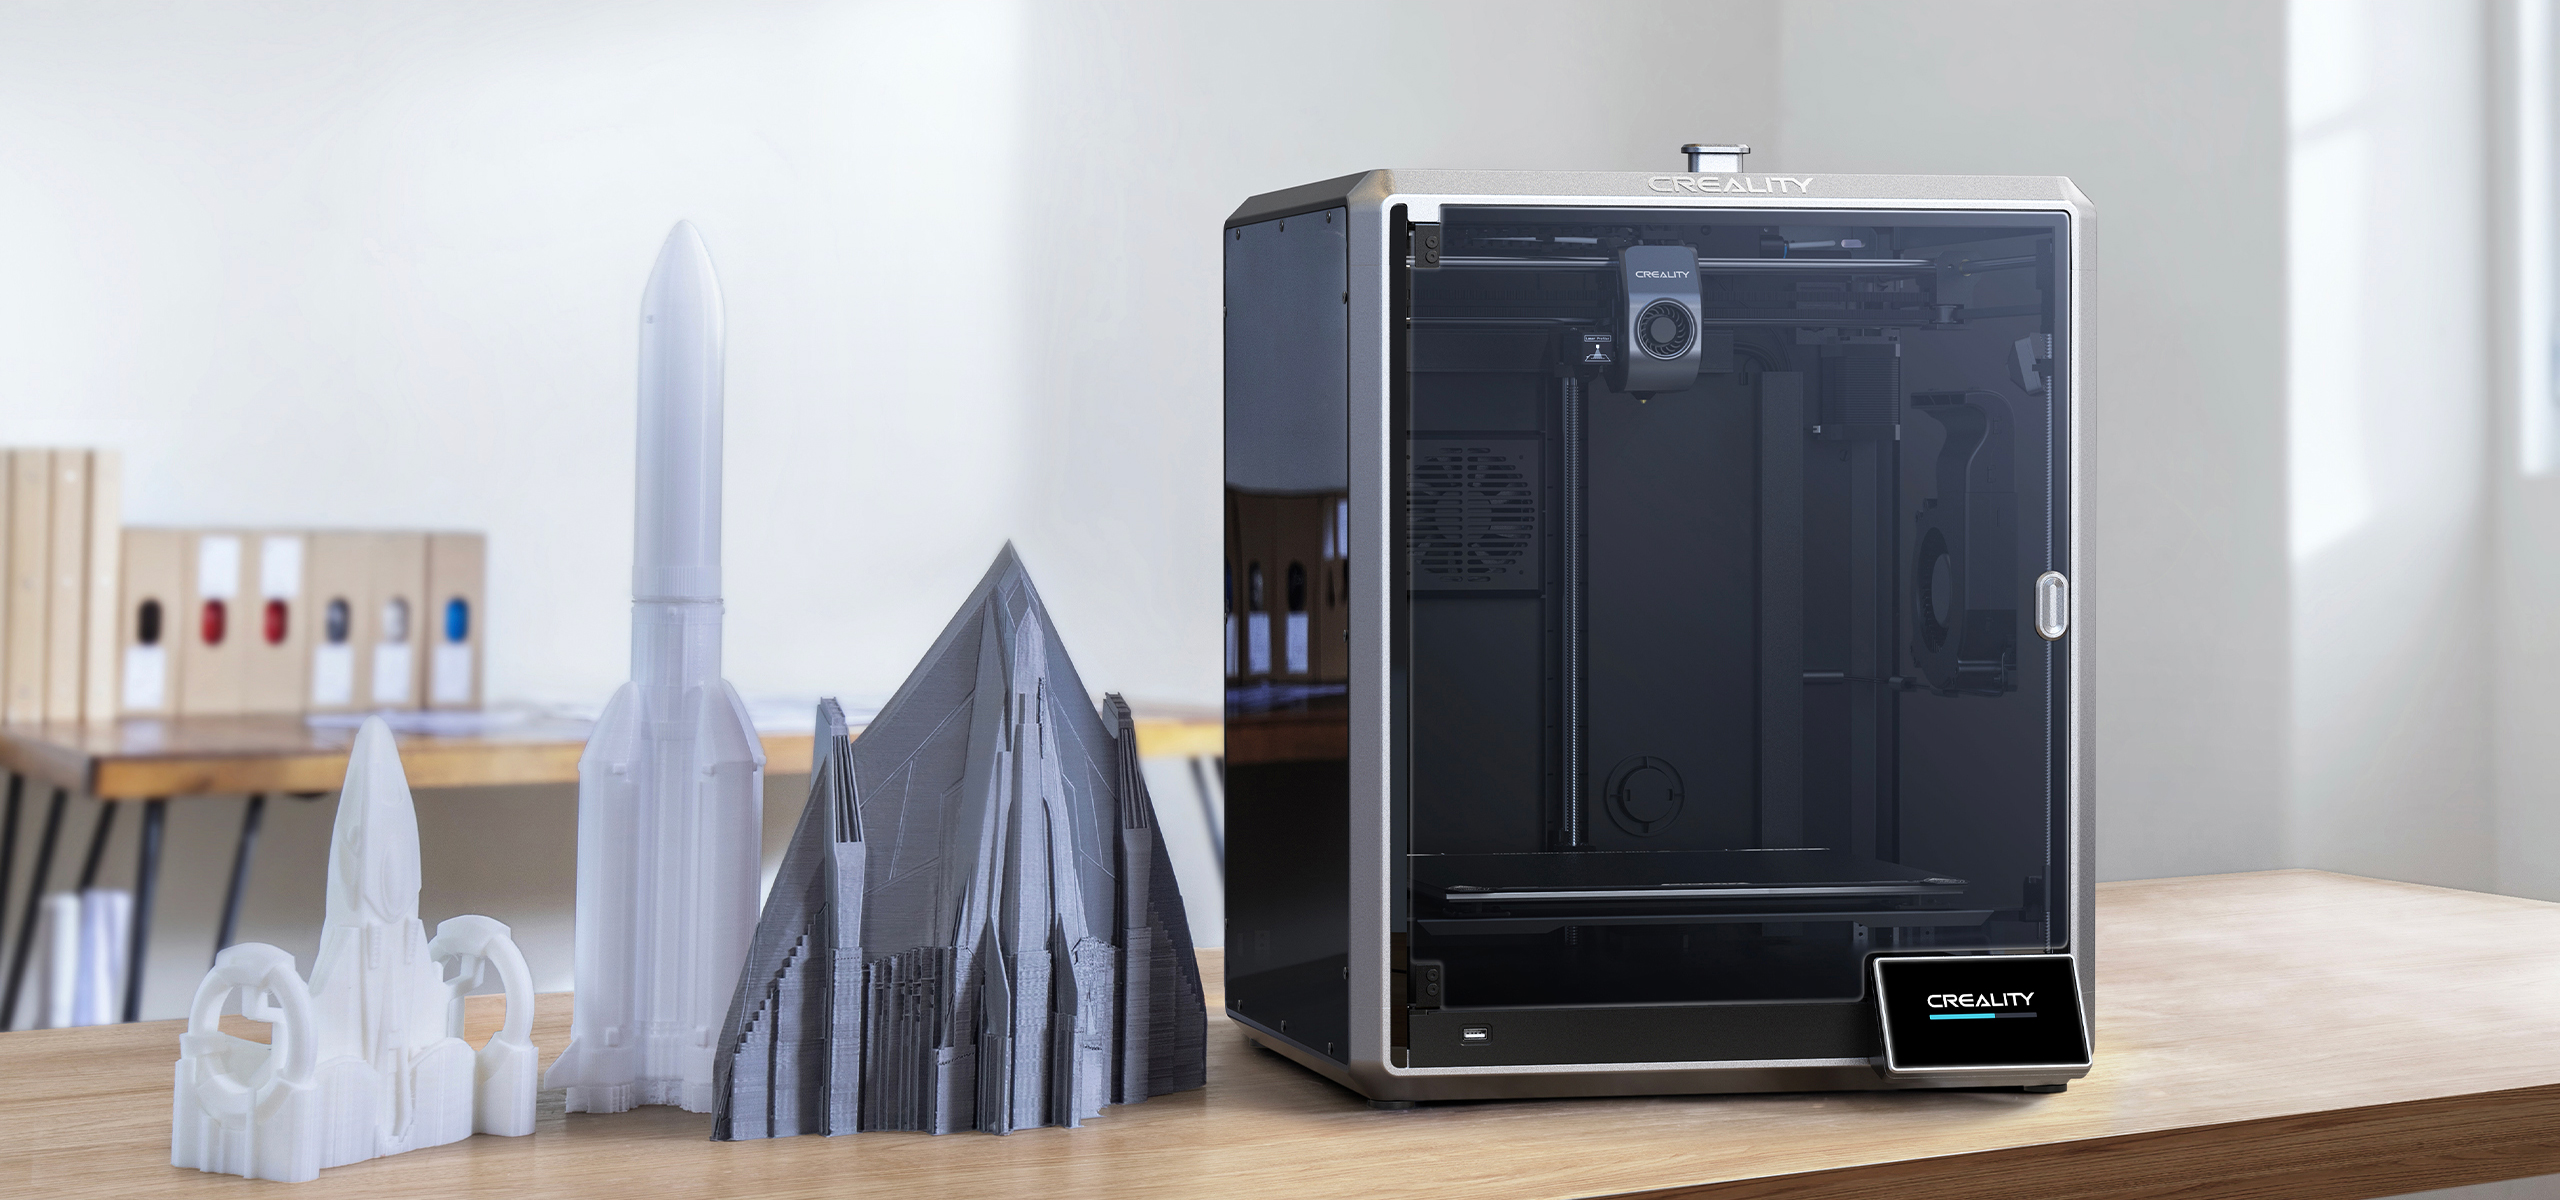 K1 Max Enclosure and prints | Official Sale for Creality K1 and K1 Max Speedy 3D Printers